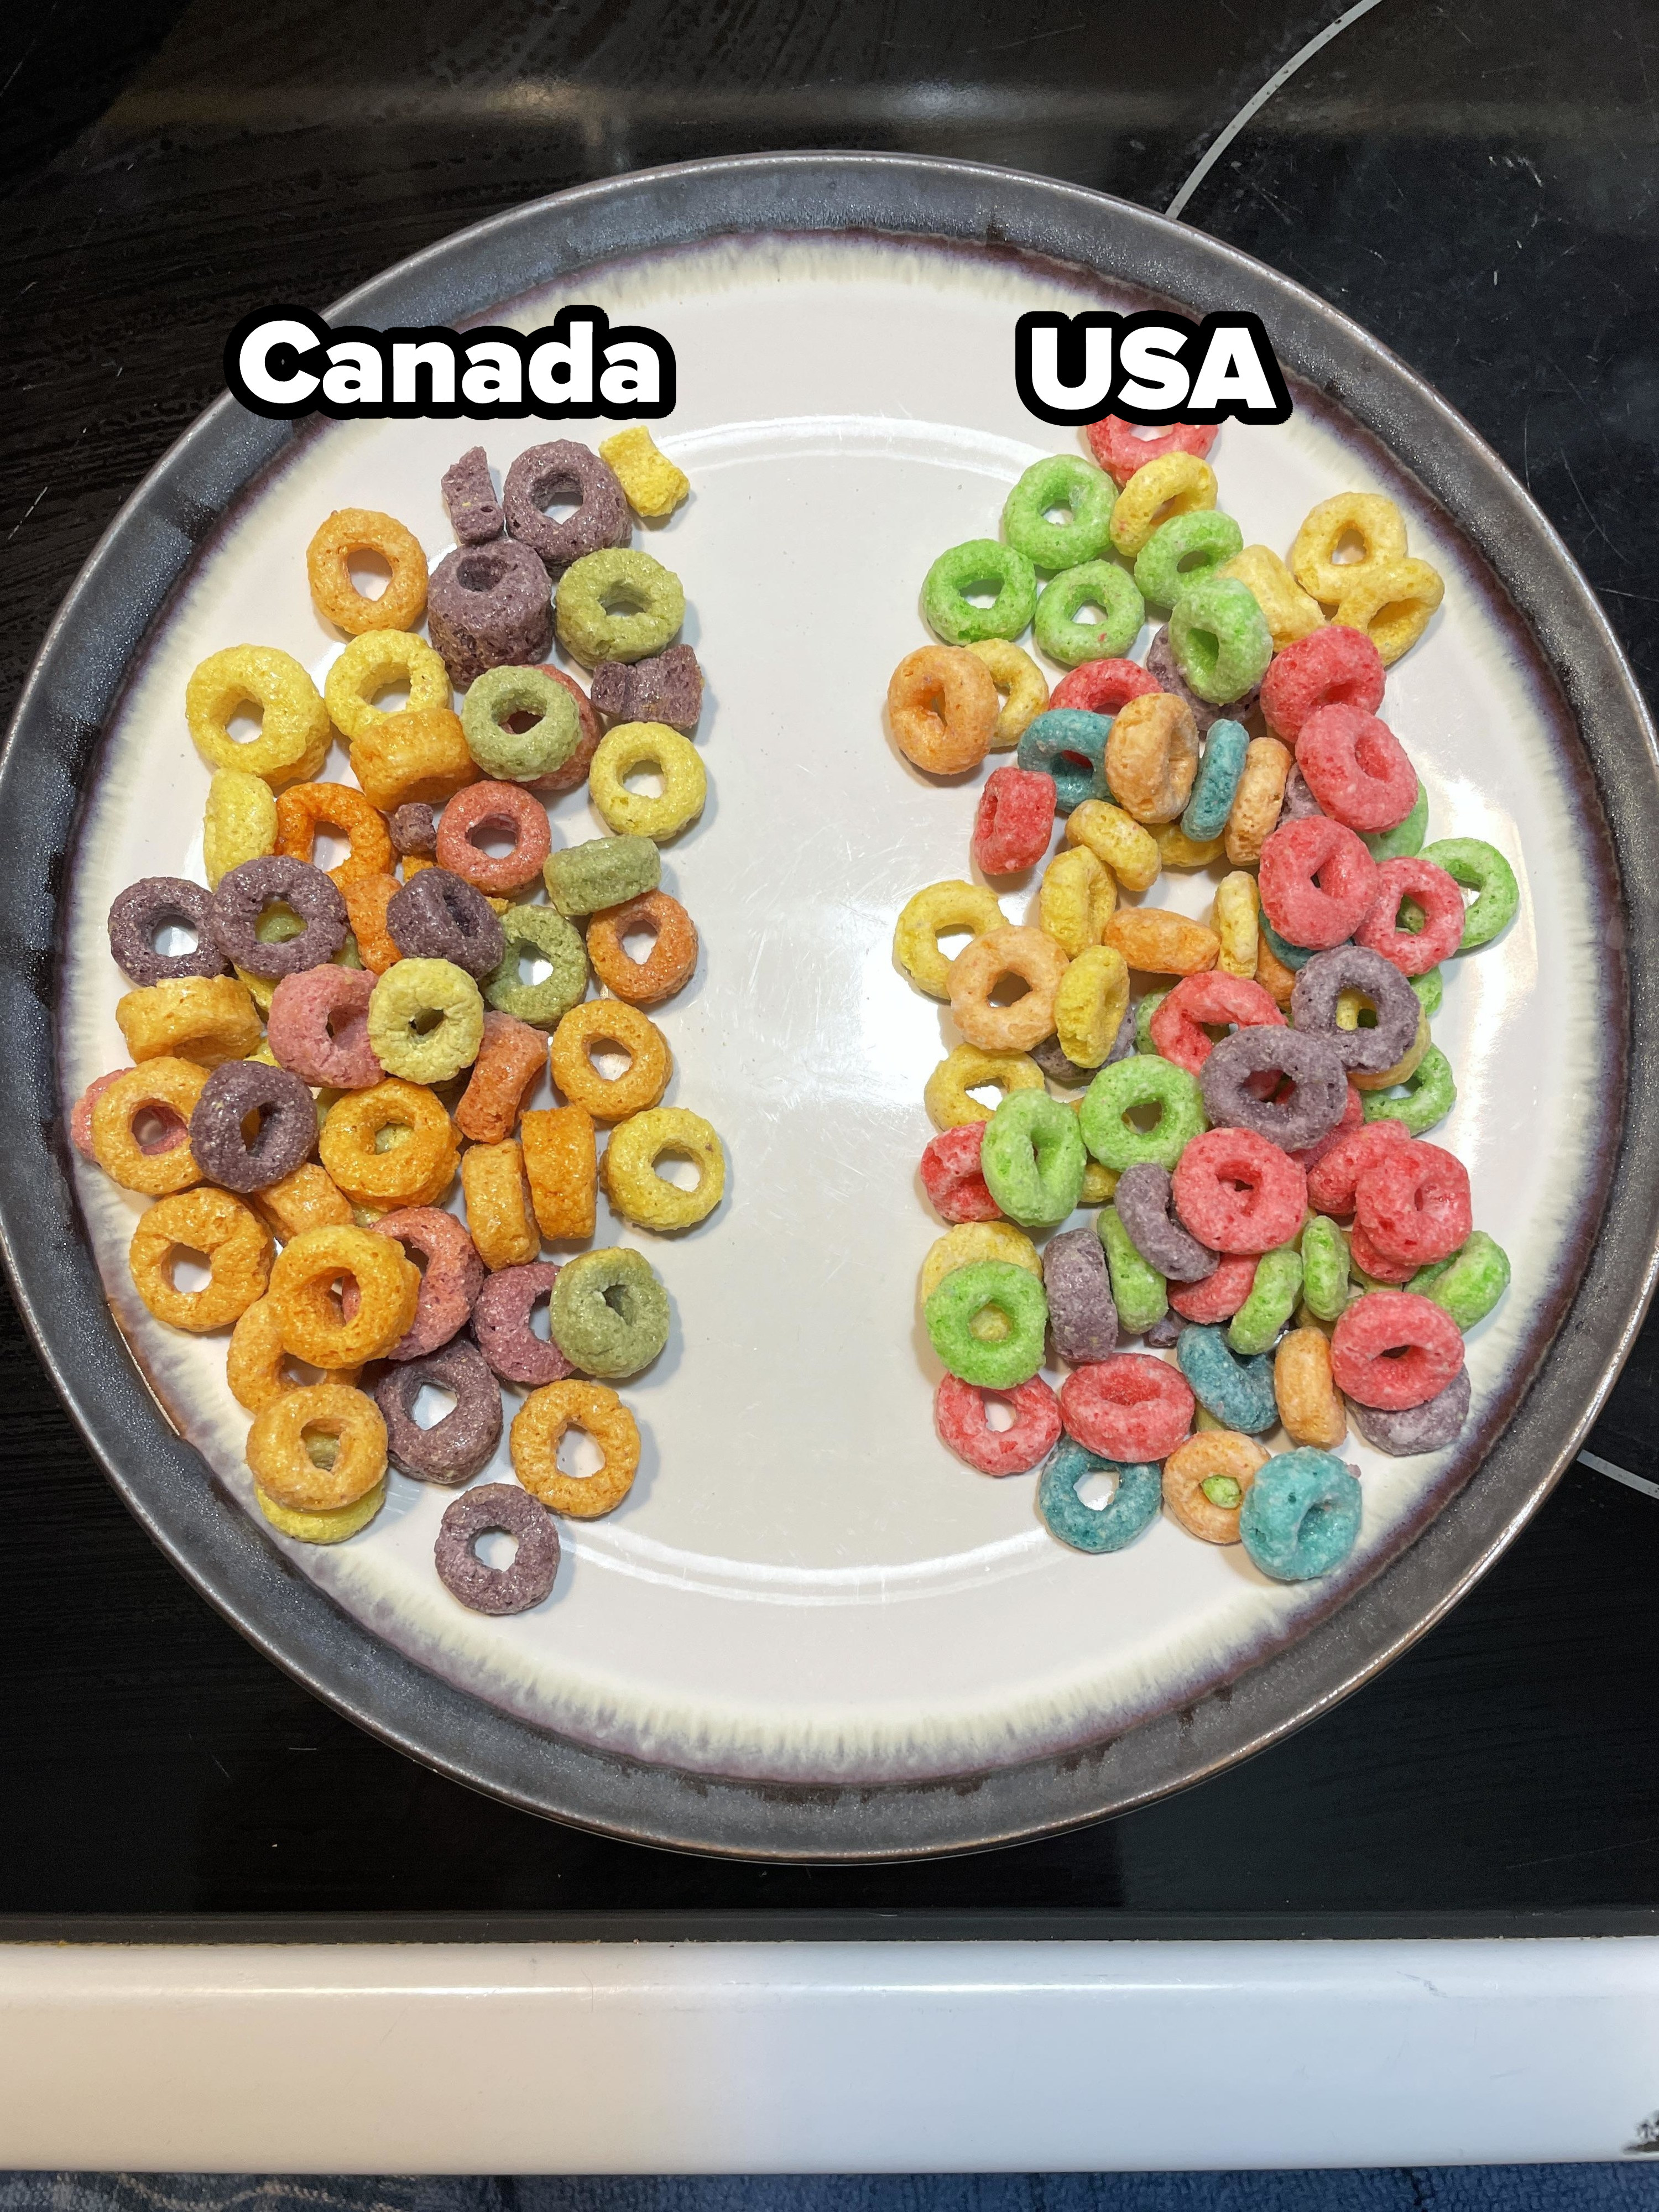 Canadian Froot Loops alongside American Froot Loops; Canadian variety is duller in color